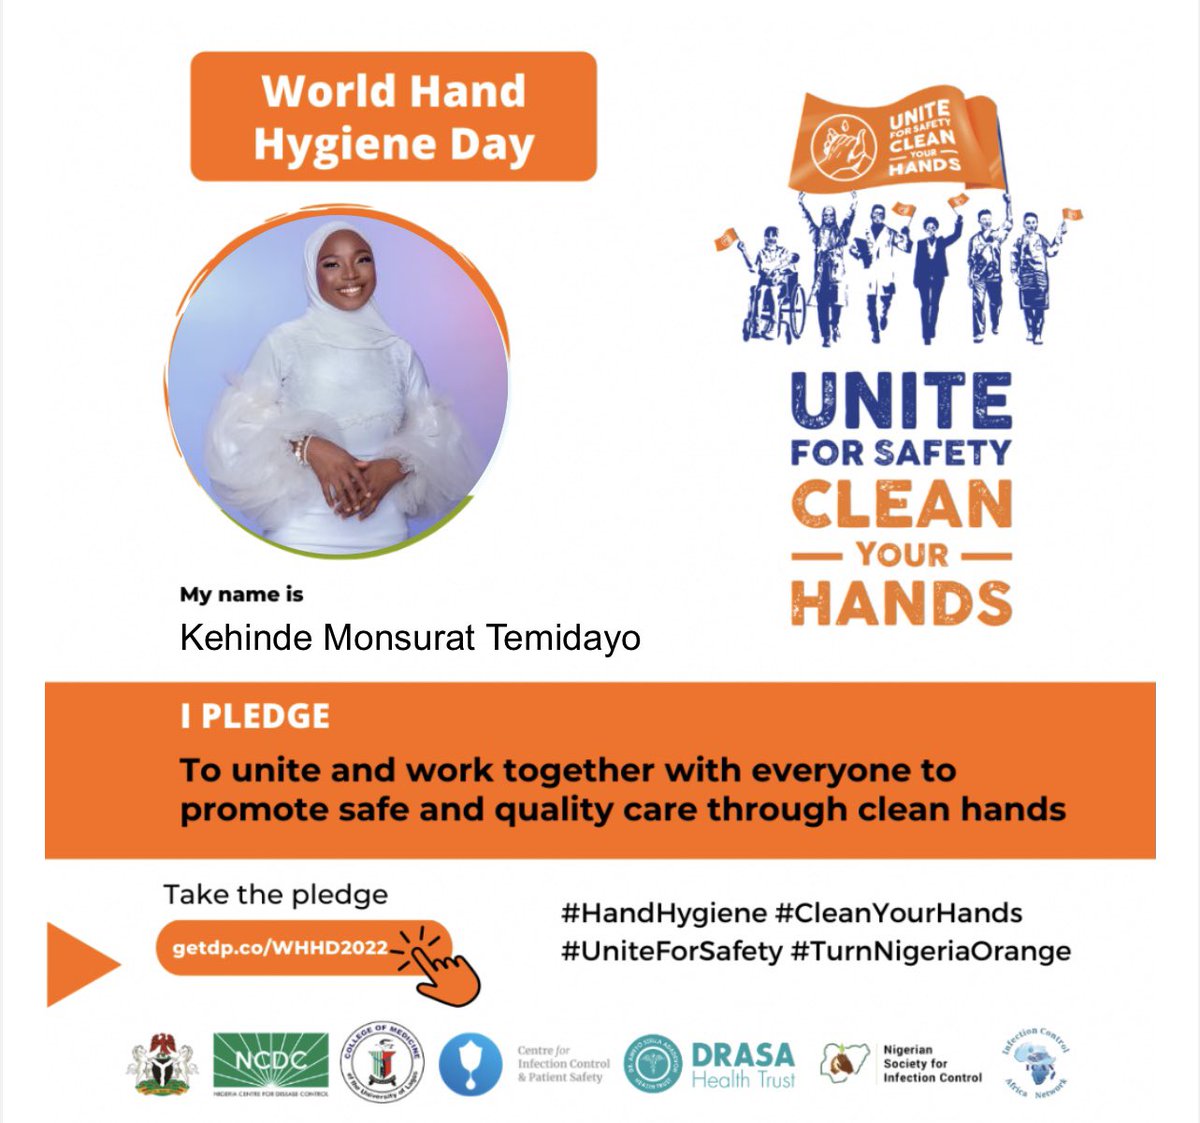 Hand Hygiene is an important part of your health care as it limits transfer of pathogens from one person to another.

#Handhygiene #Cleanyourhands #Uniteforsafety #TurnNigeriaOrange